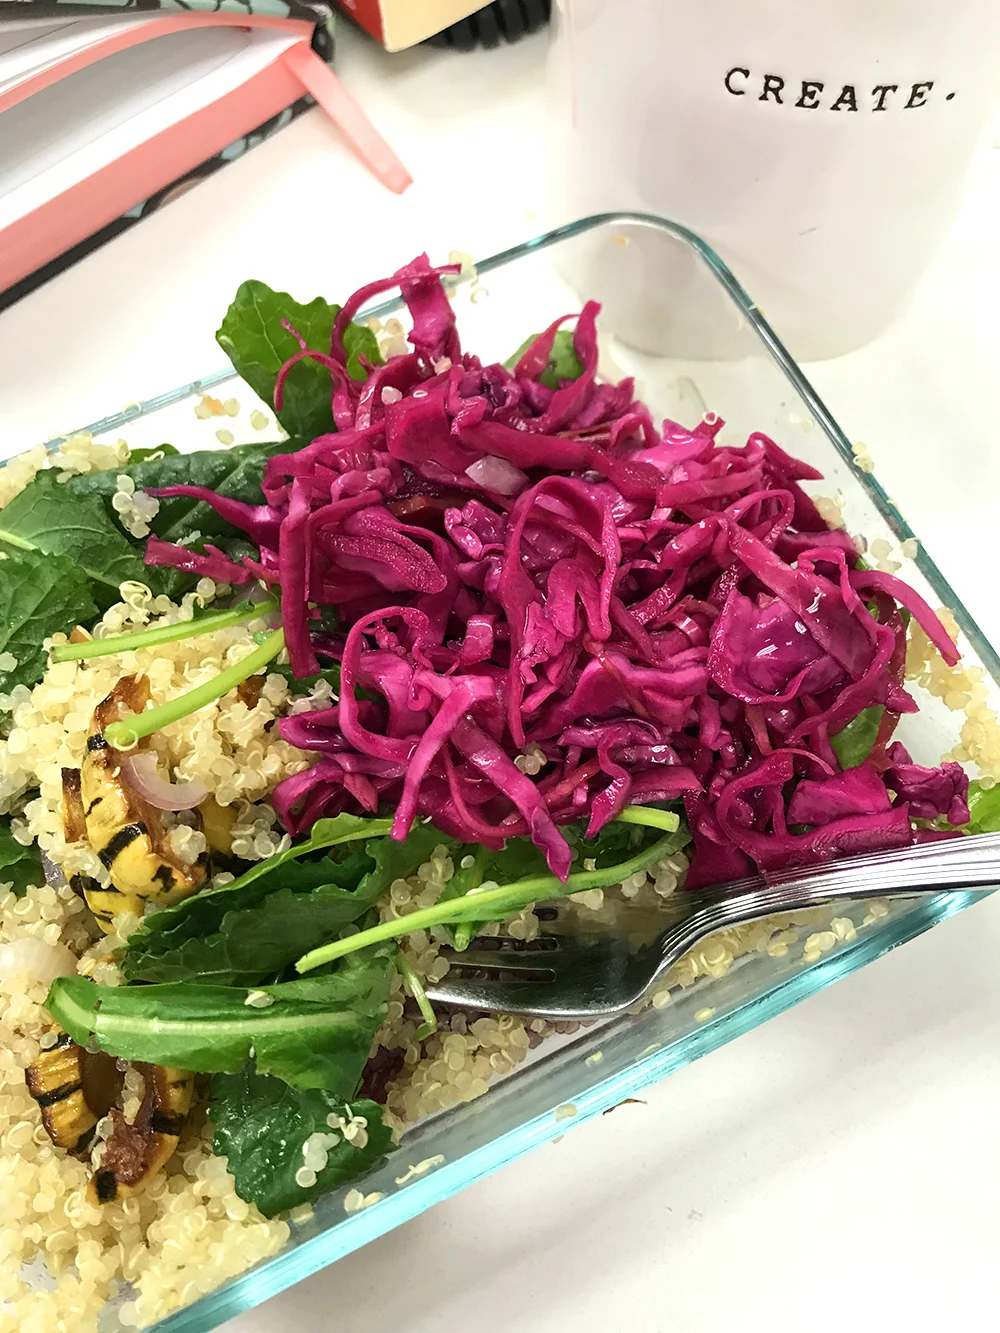 A desk lunch featuring quinoa, arugula, roasted squash and pickled red cabbage. Nearby, a mug with the word "create" stamped on it.